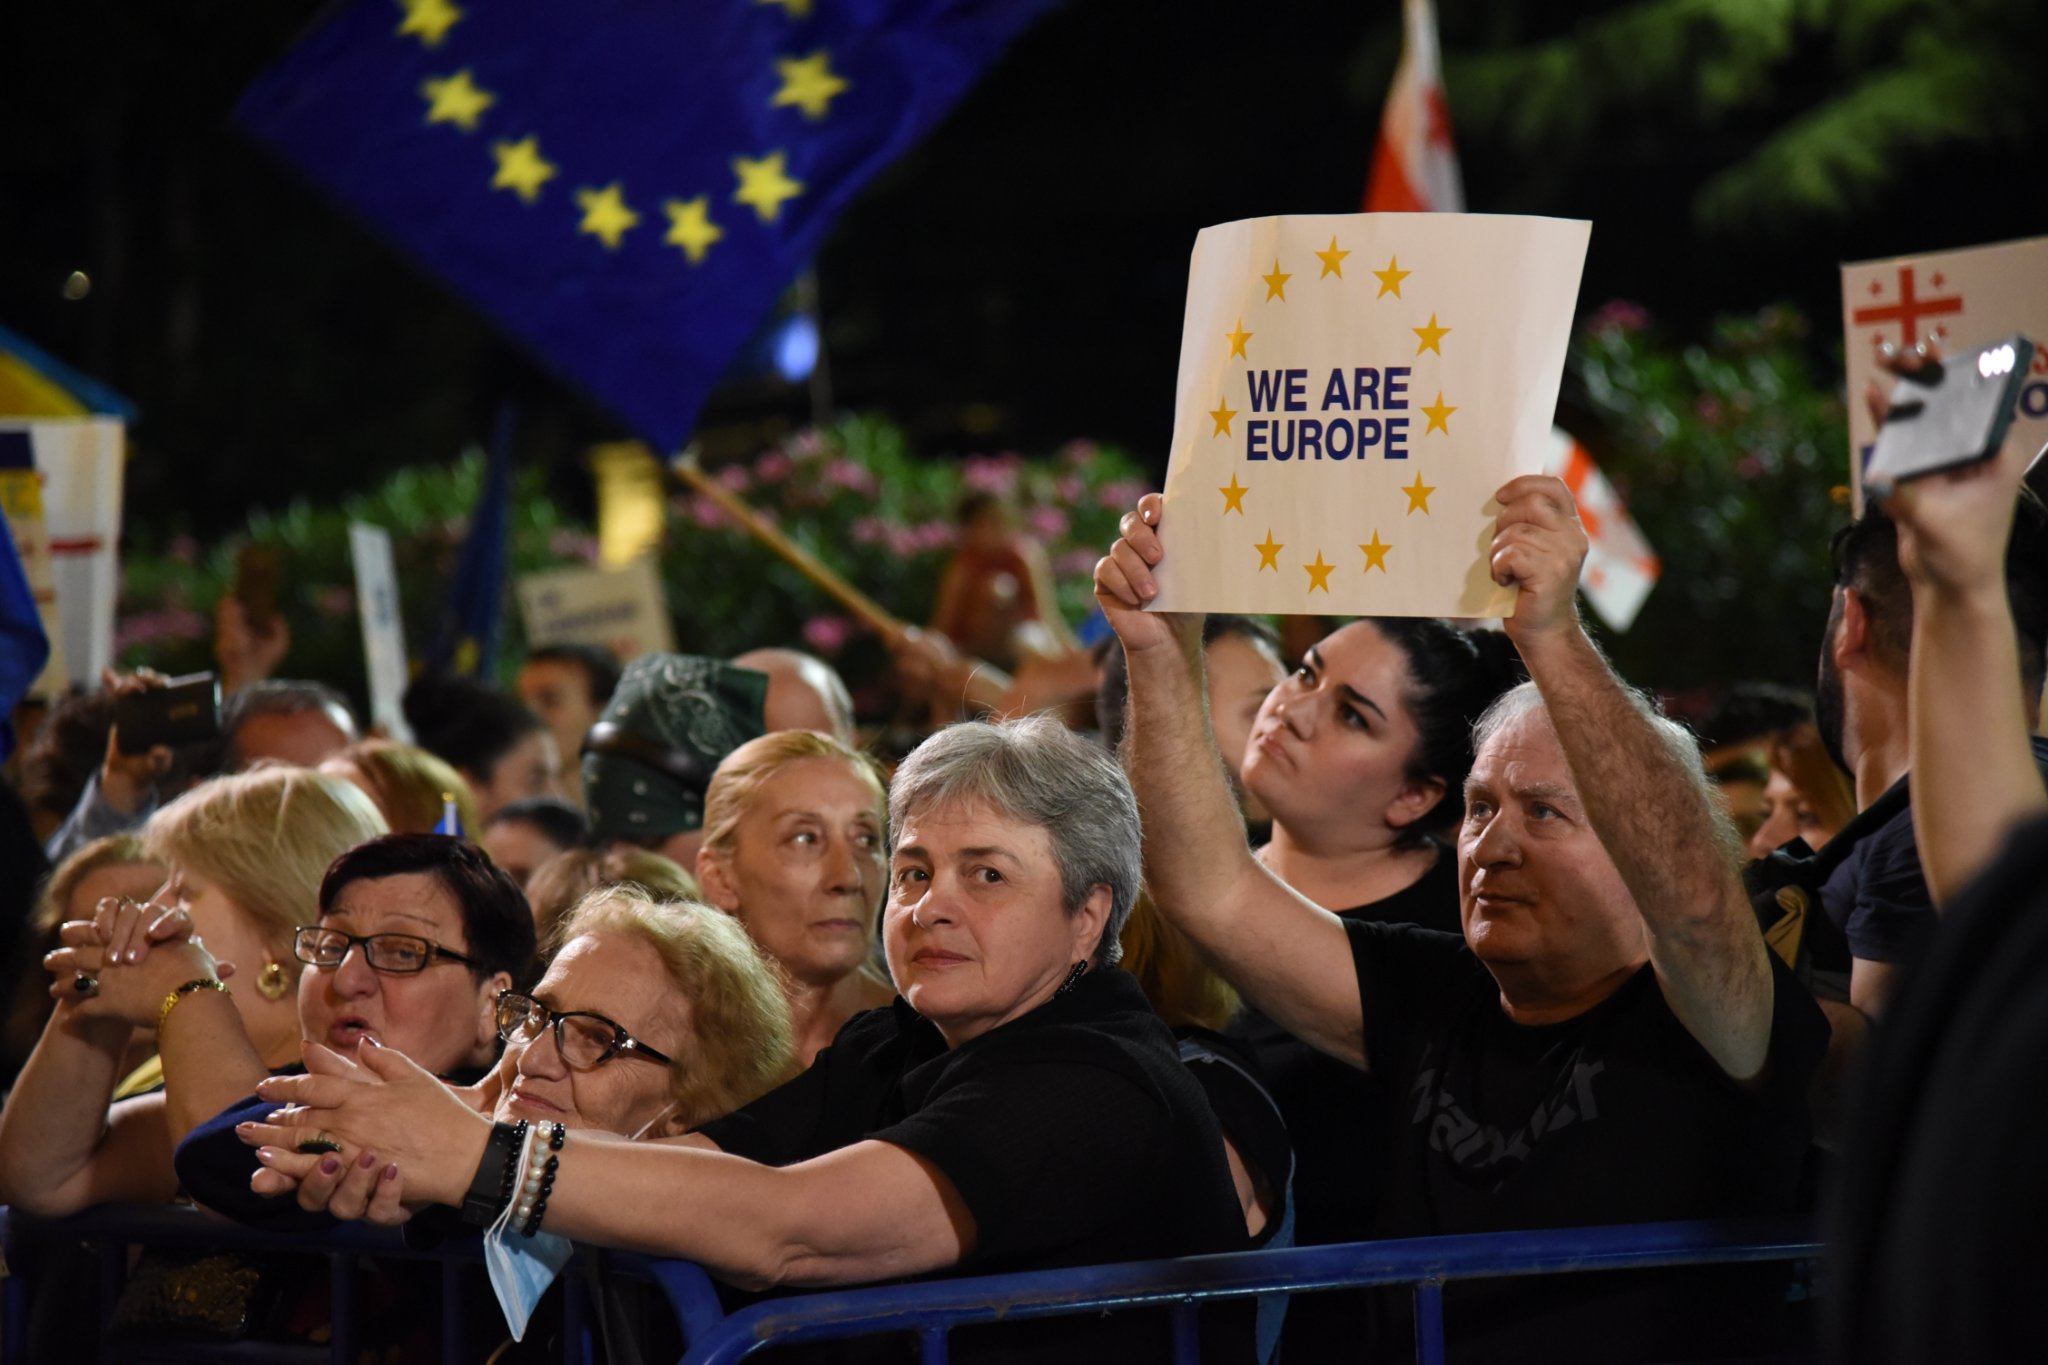 “Home to Europe” – A large-scale rally was held on June 24